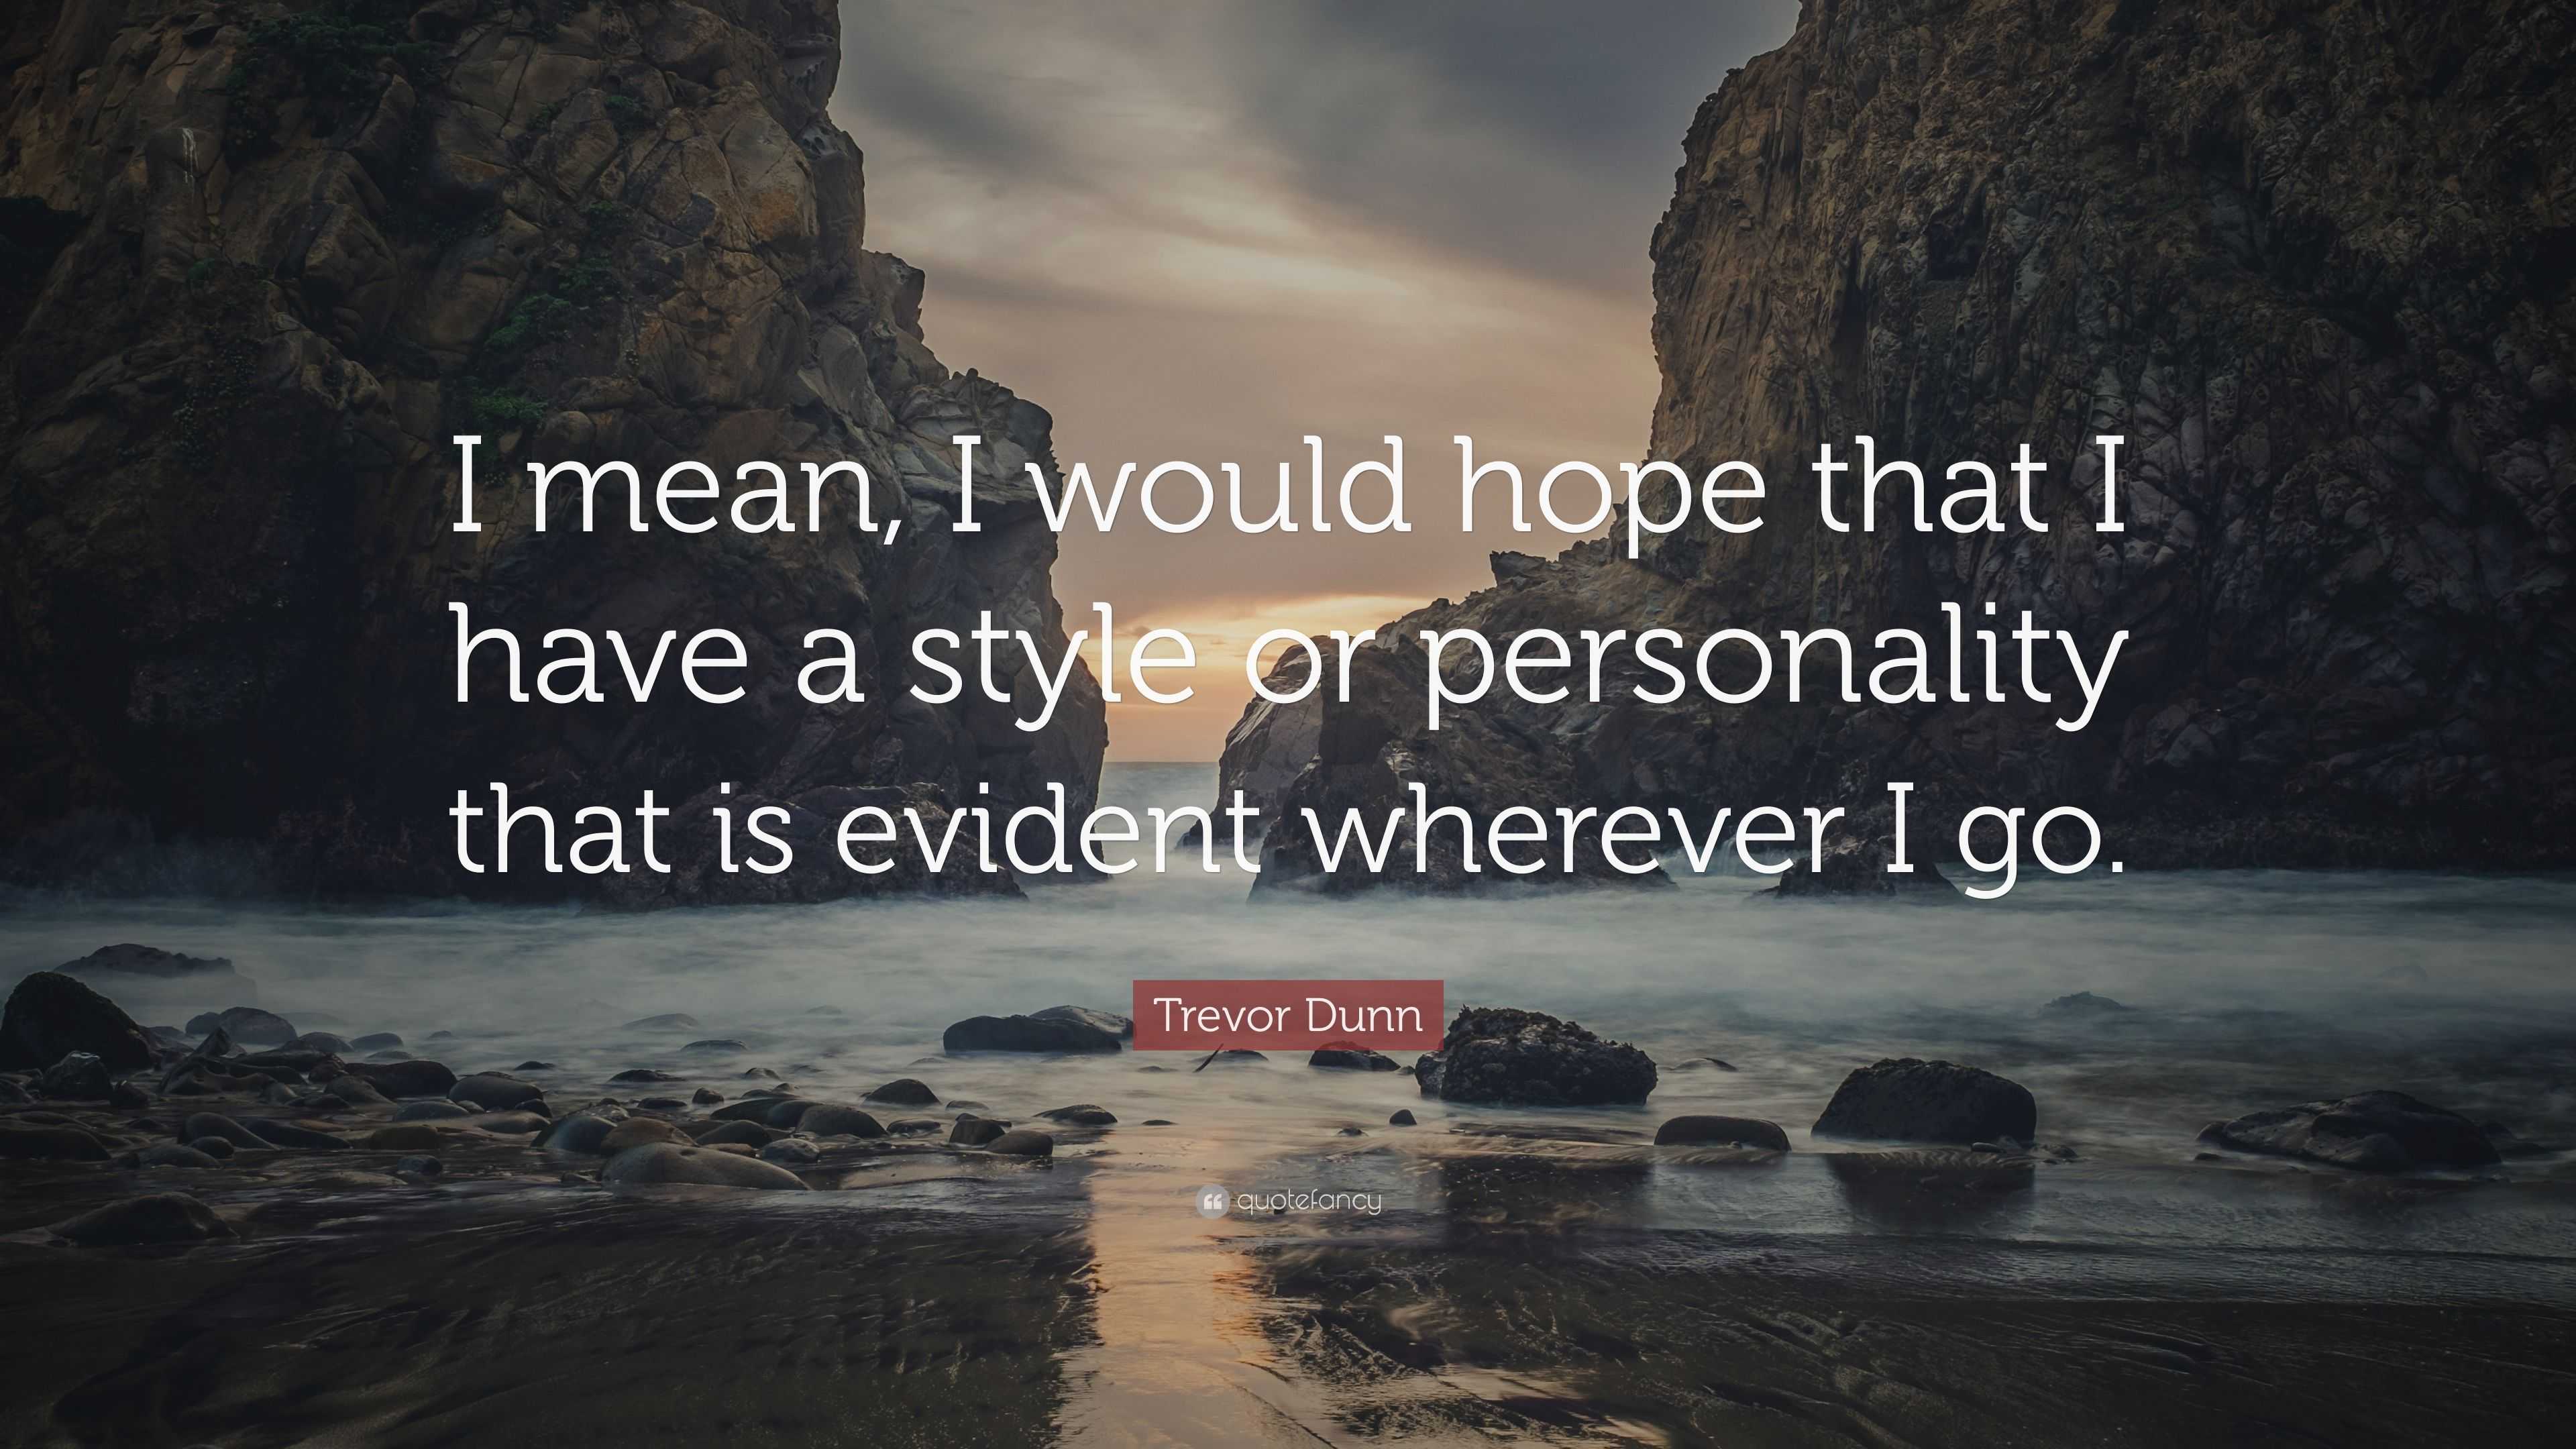 Trevor Dunn Quote: “I mean, I would hope that I have a style or ...